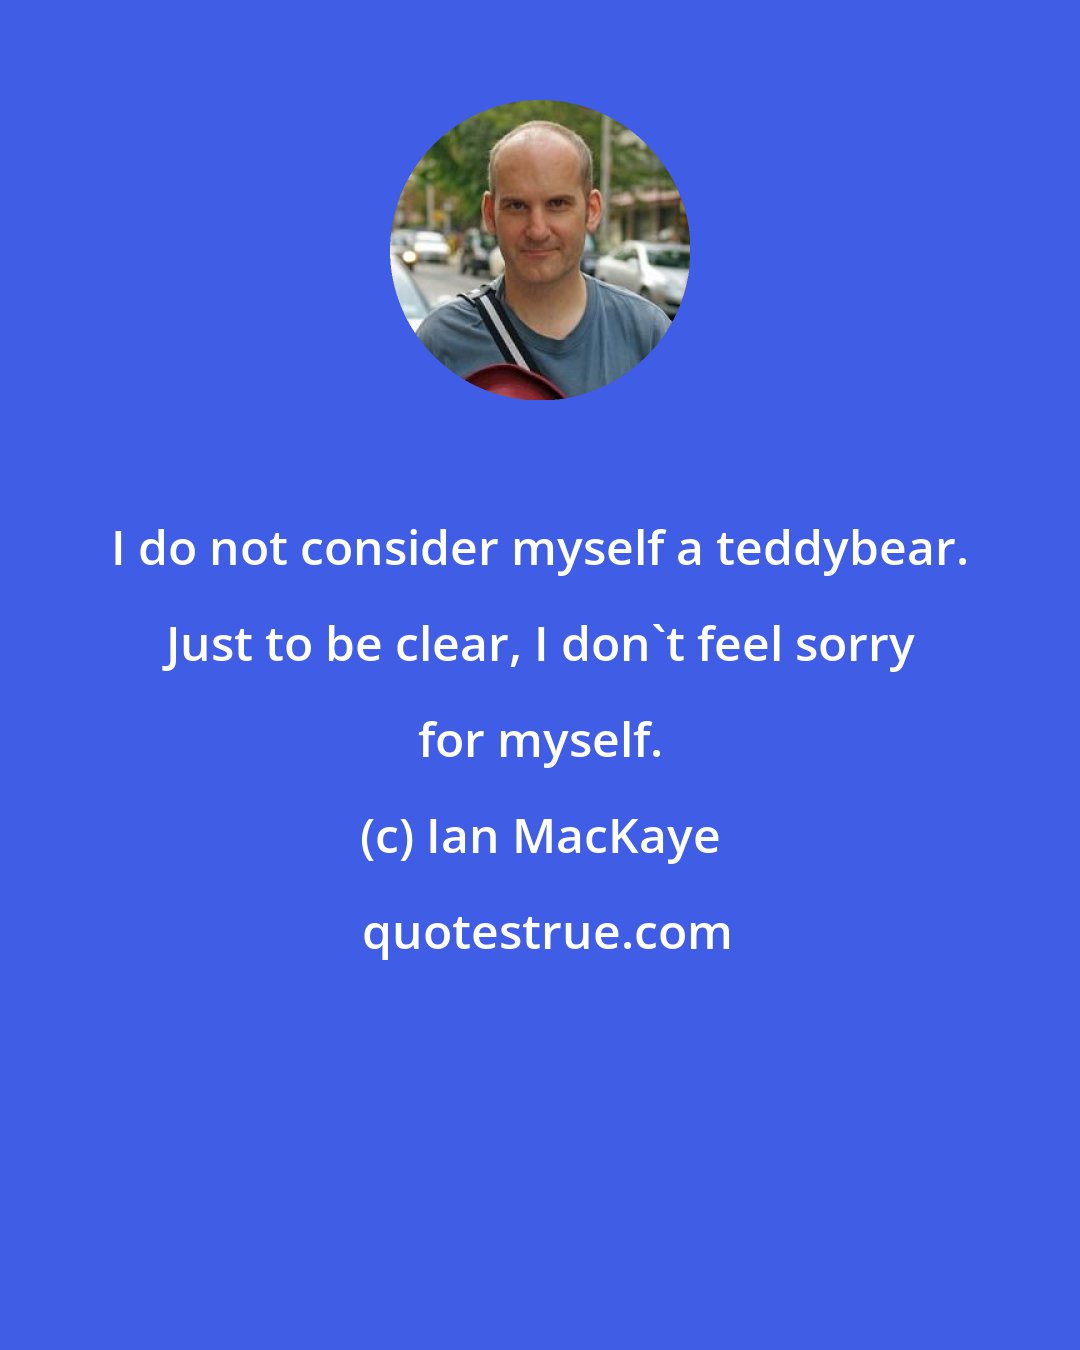 Ian MacKaye: I do not consider myself a teddybear. Just to be clear, I don't feel sorry for myself.